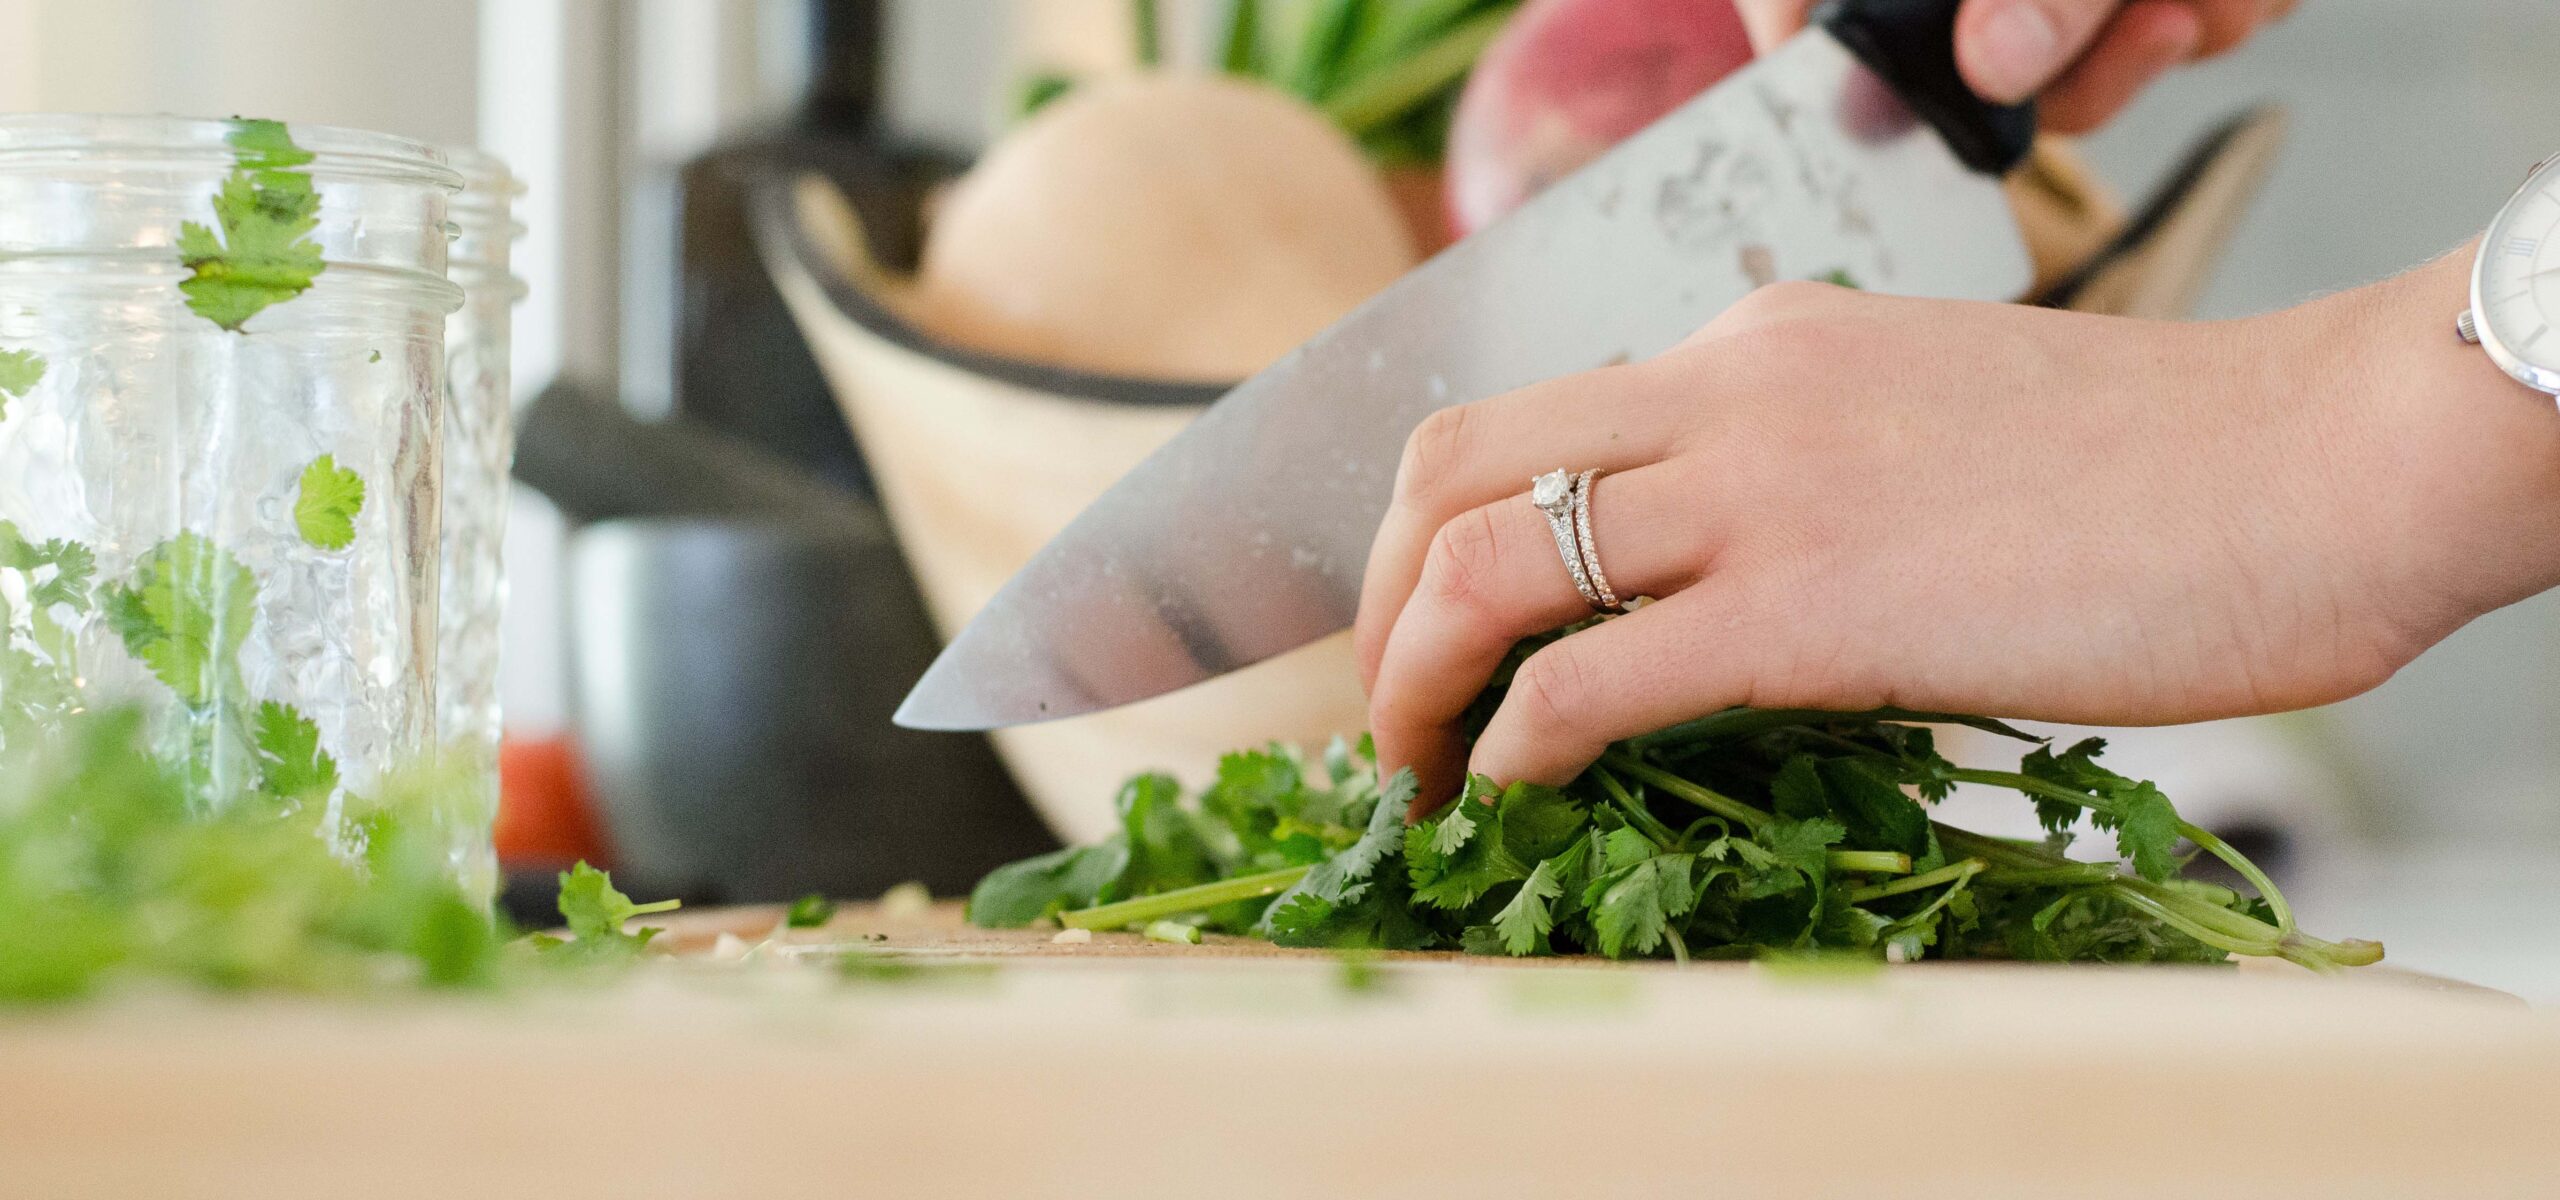 Woman's hands using a chef's knife to chop herbs on a wood cutting board.